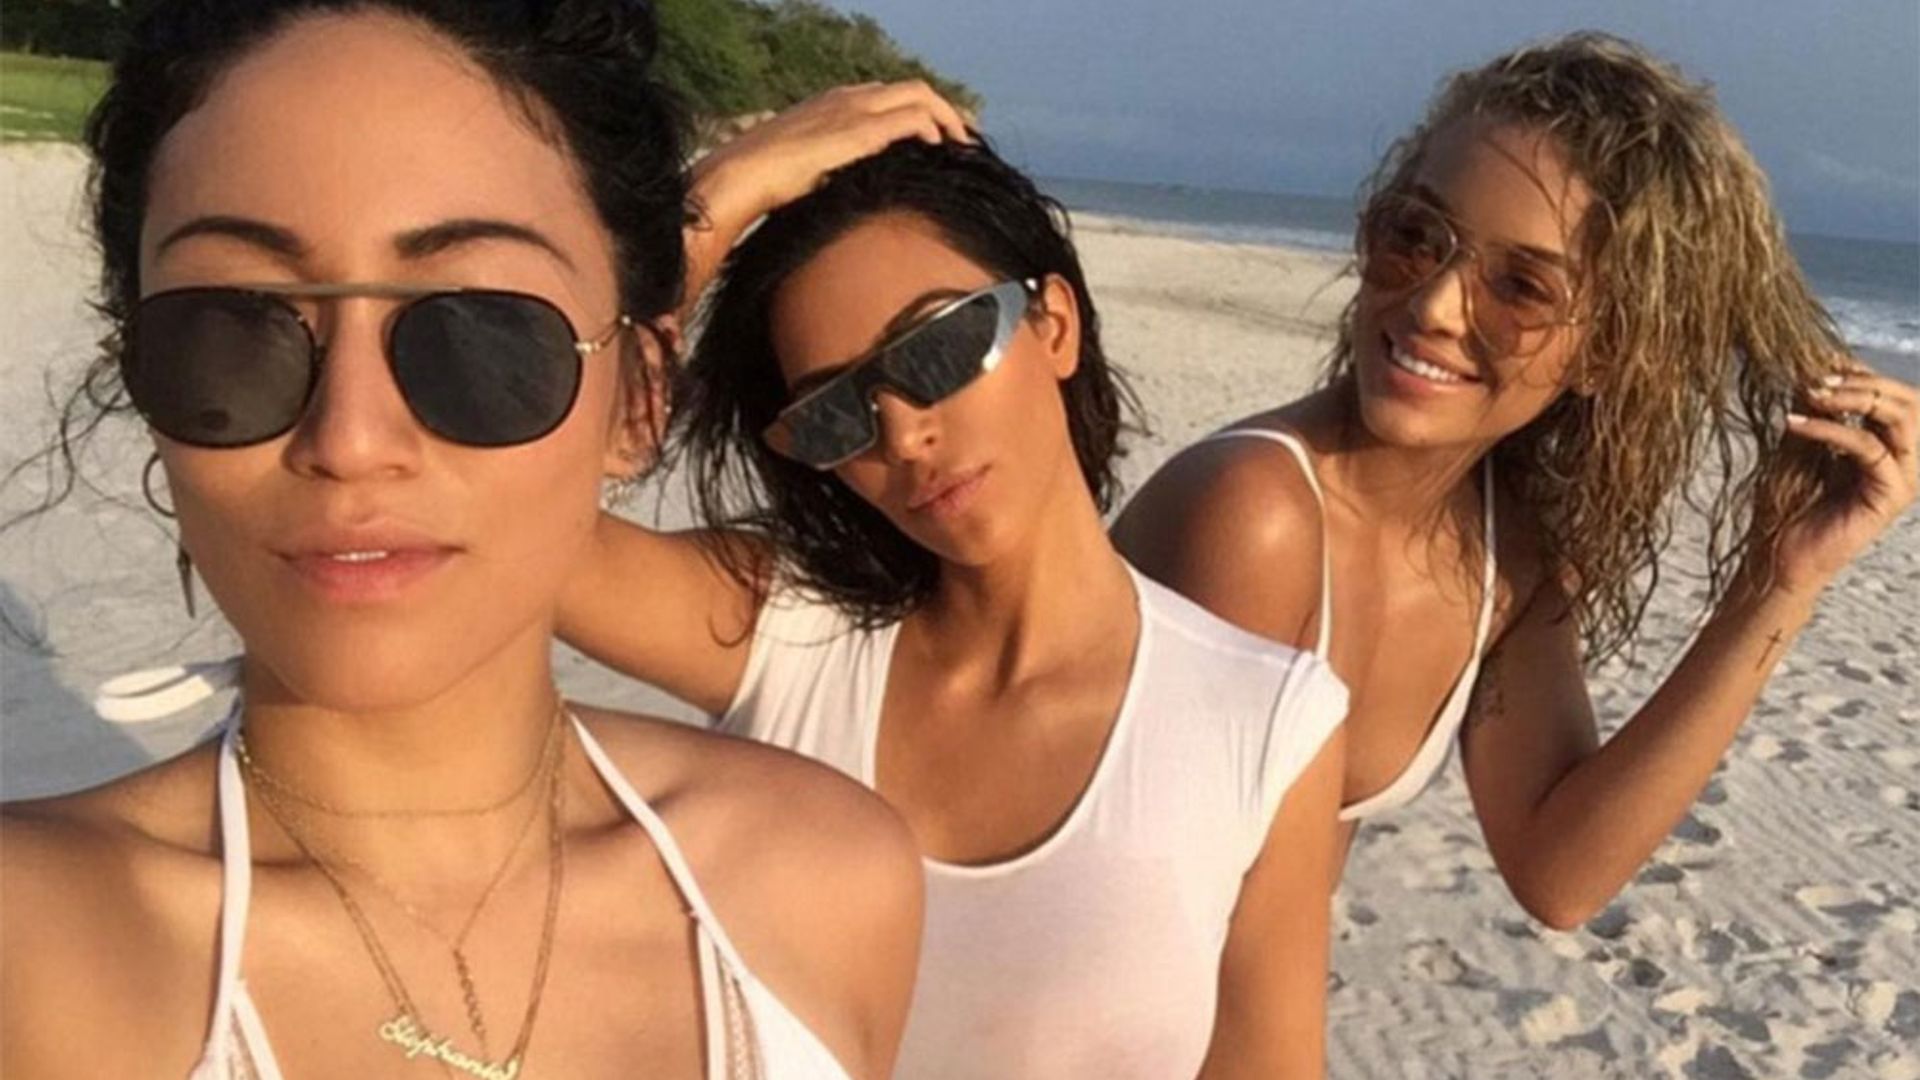 Here's how to take the perfect summer selfie